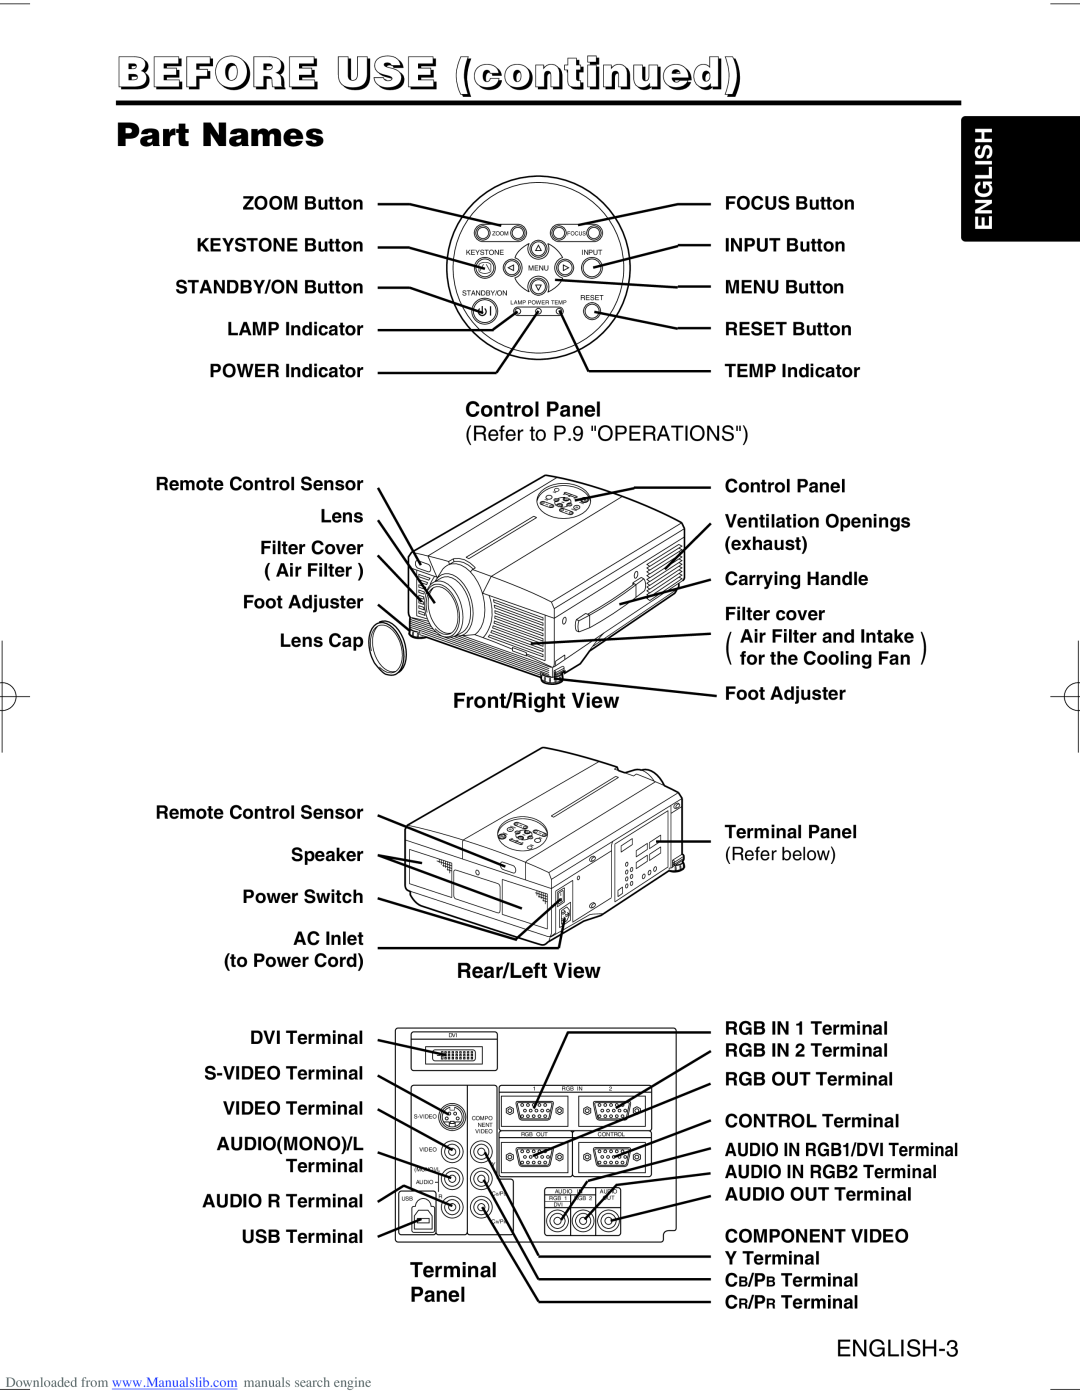 Hitachi CP-X995W user manual BEFORE USE continued, Part Names, English 